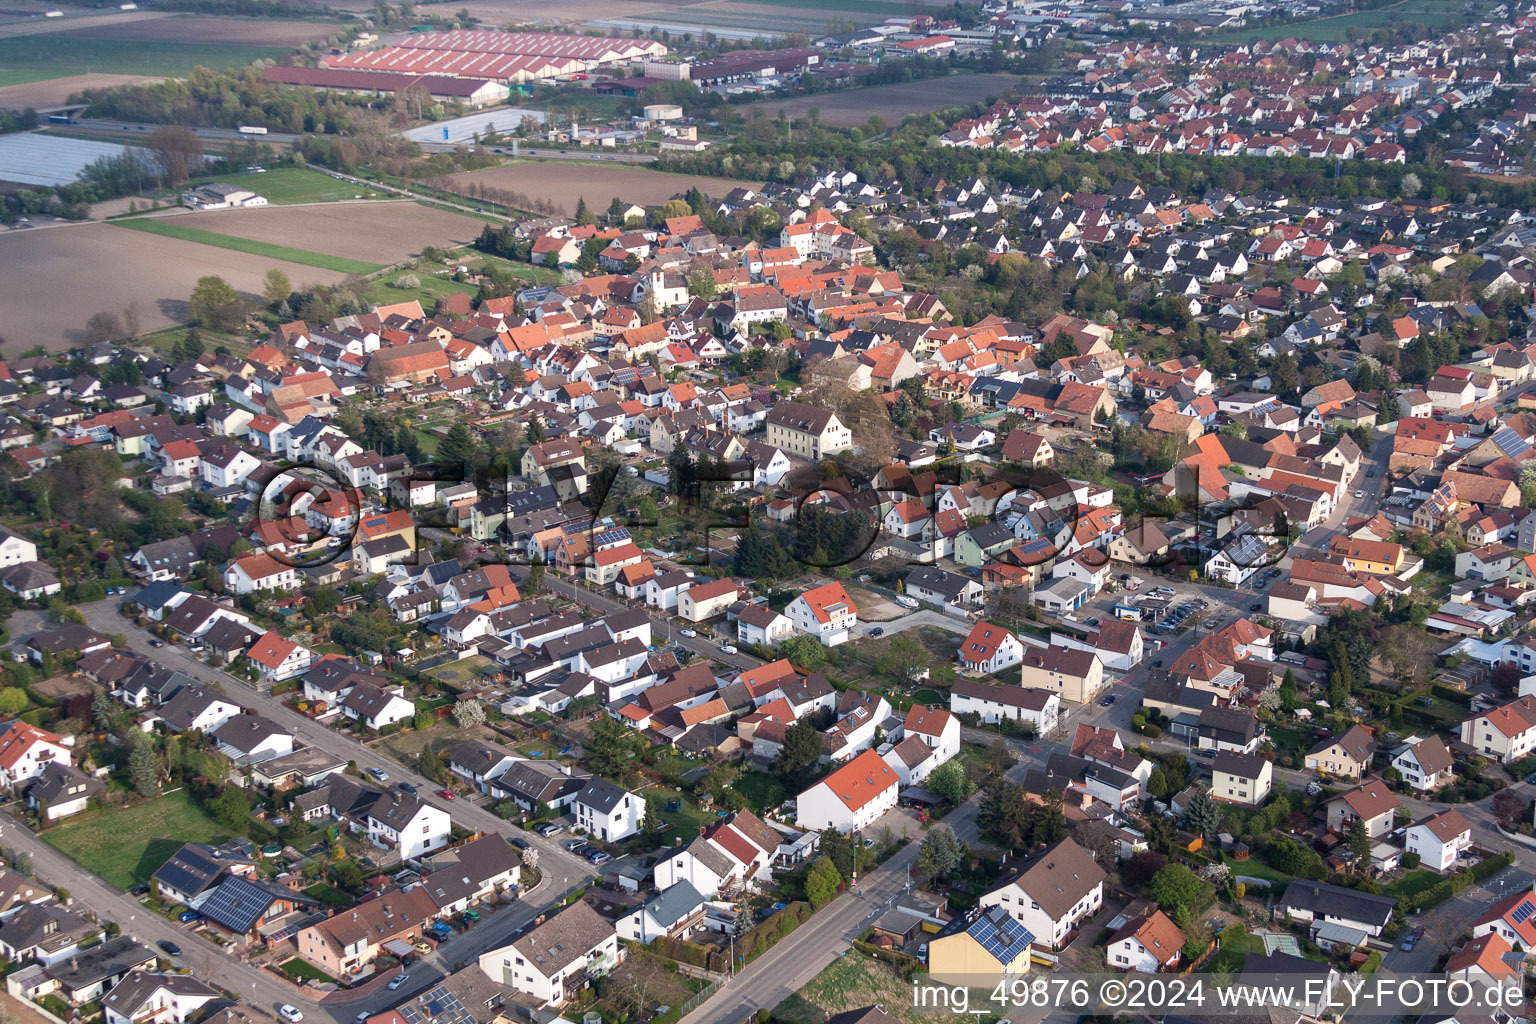 Town View of the streets and houses of the residential areas in Schauernheim in the state Rhineland-Palatinate, Germany